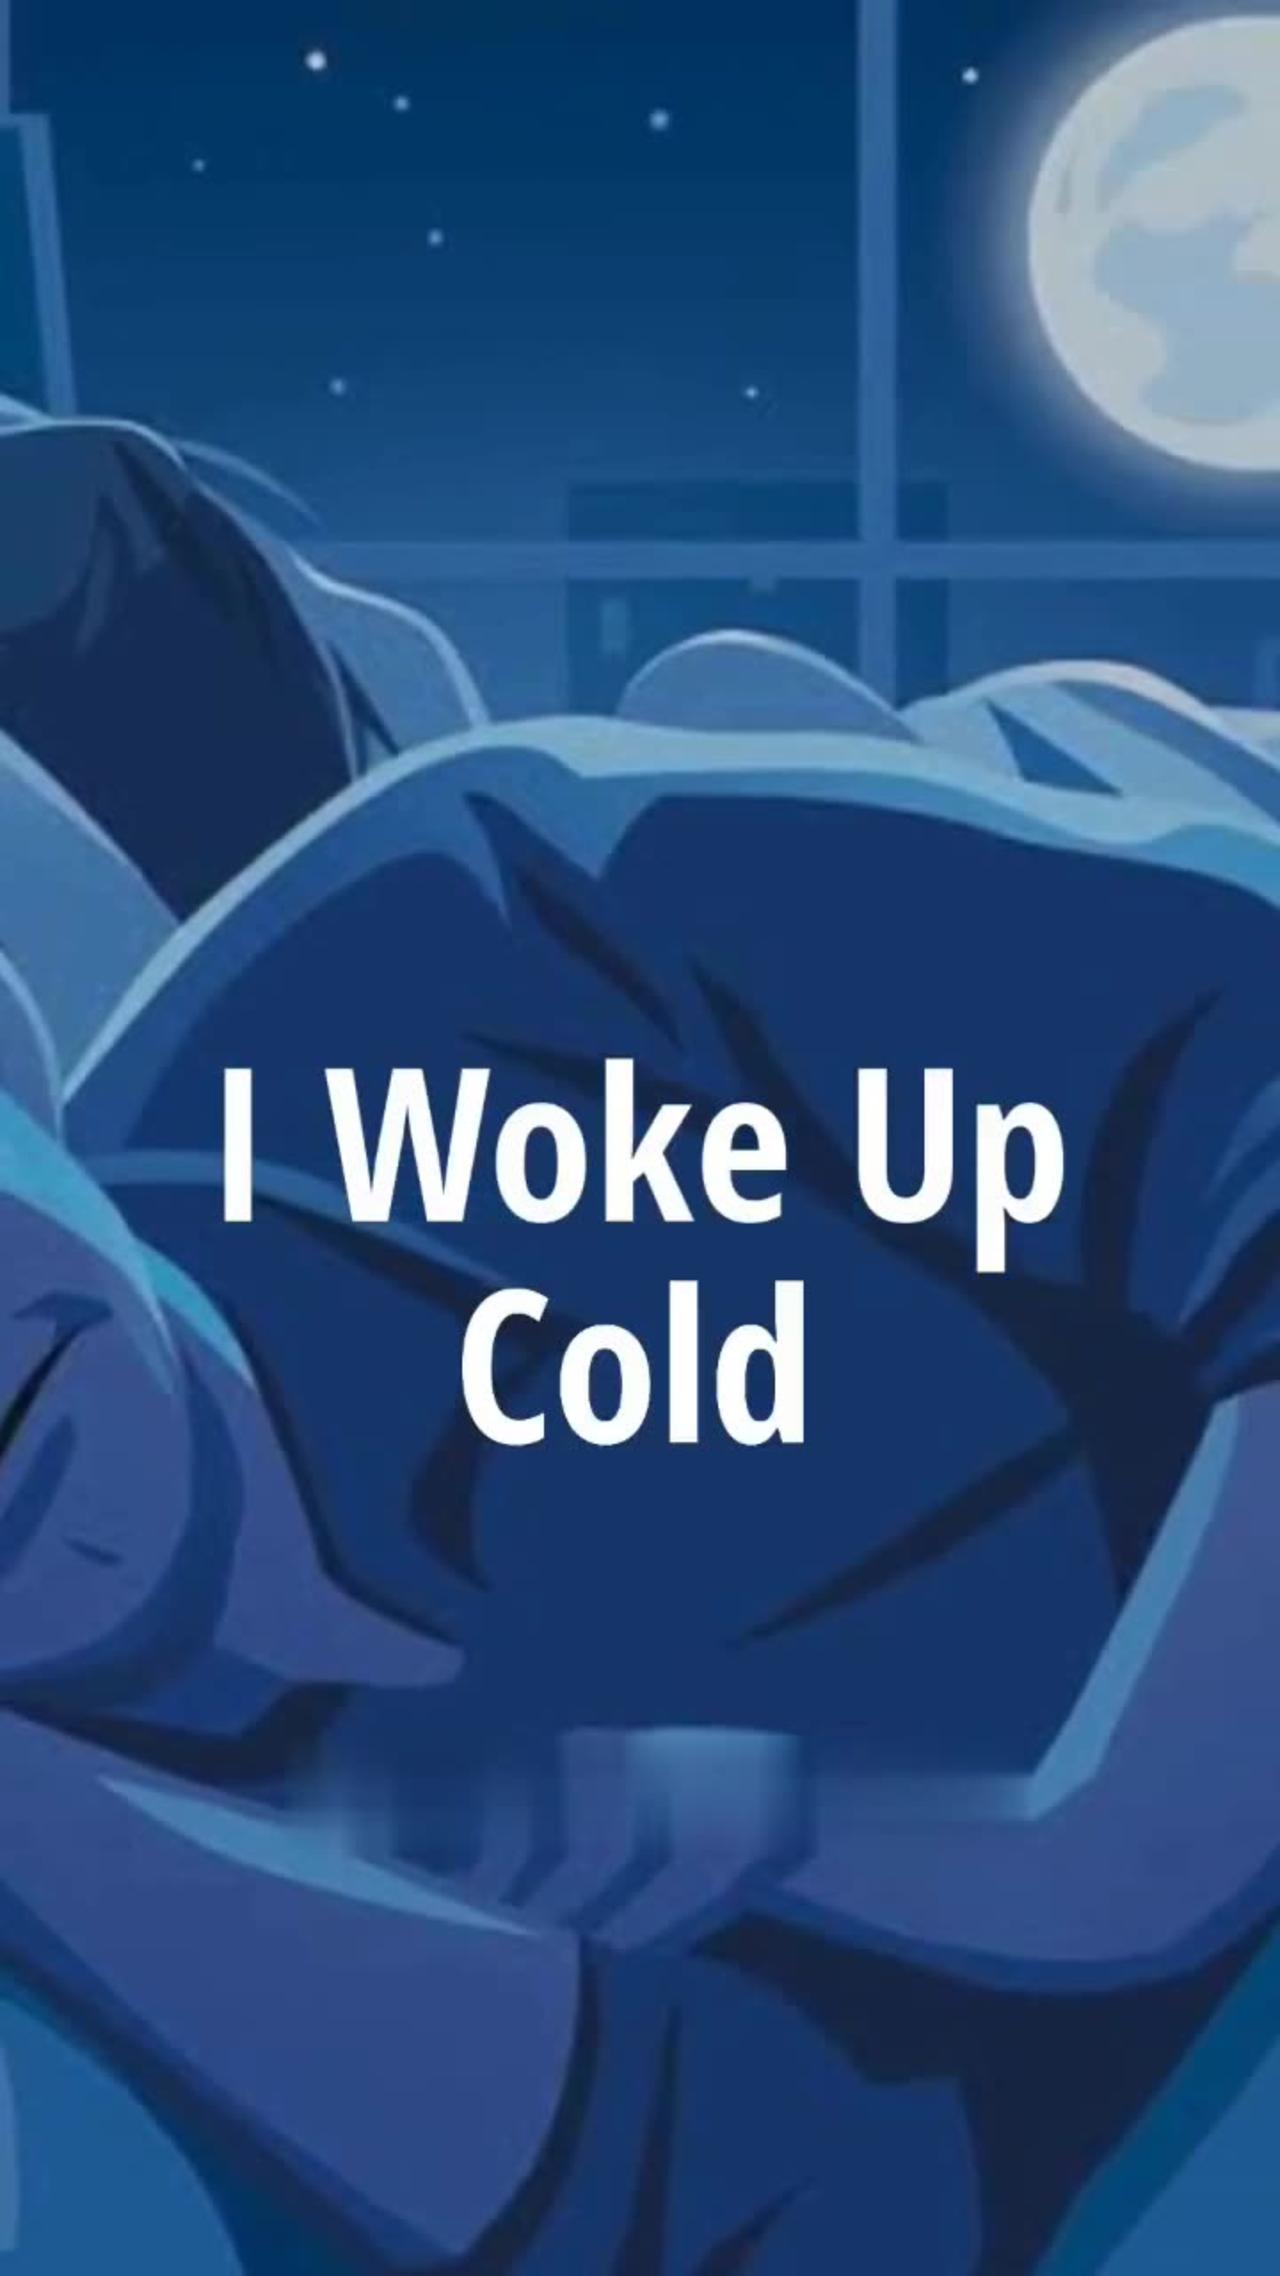 I WOKE UP COLD #SCARY #TRENDING #VIRAL